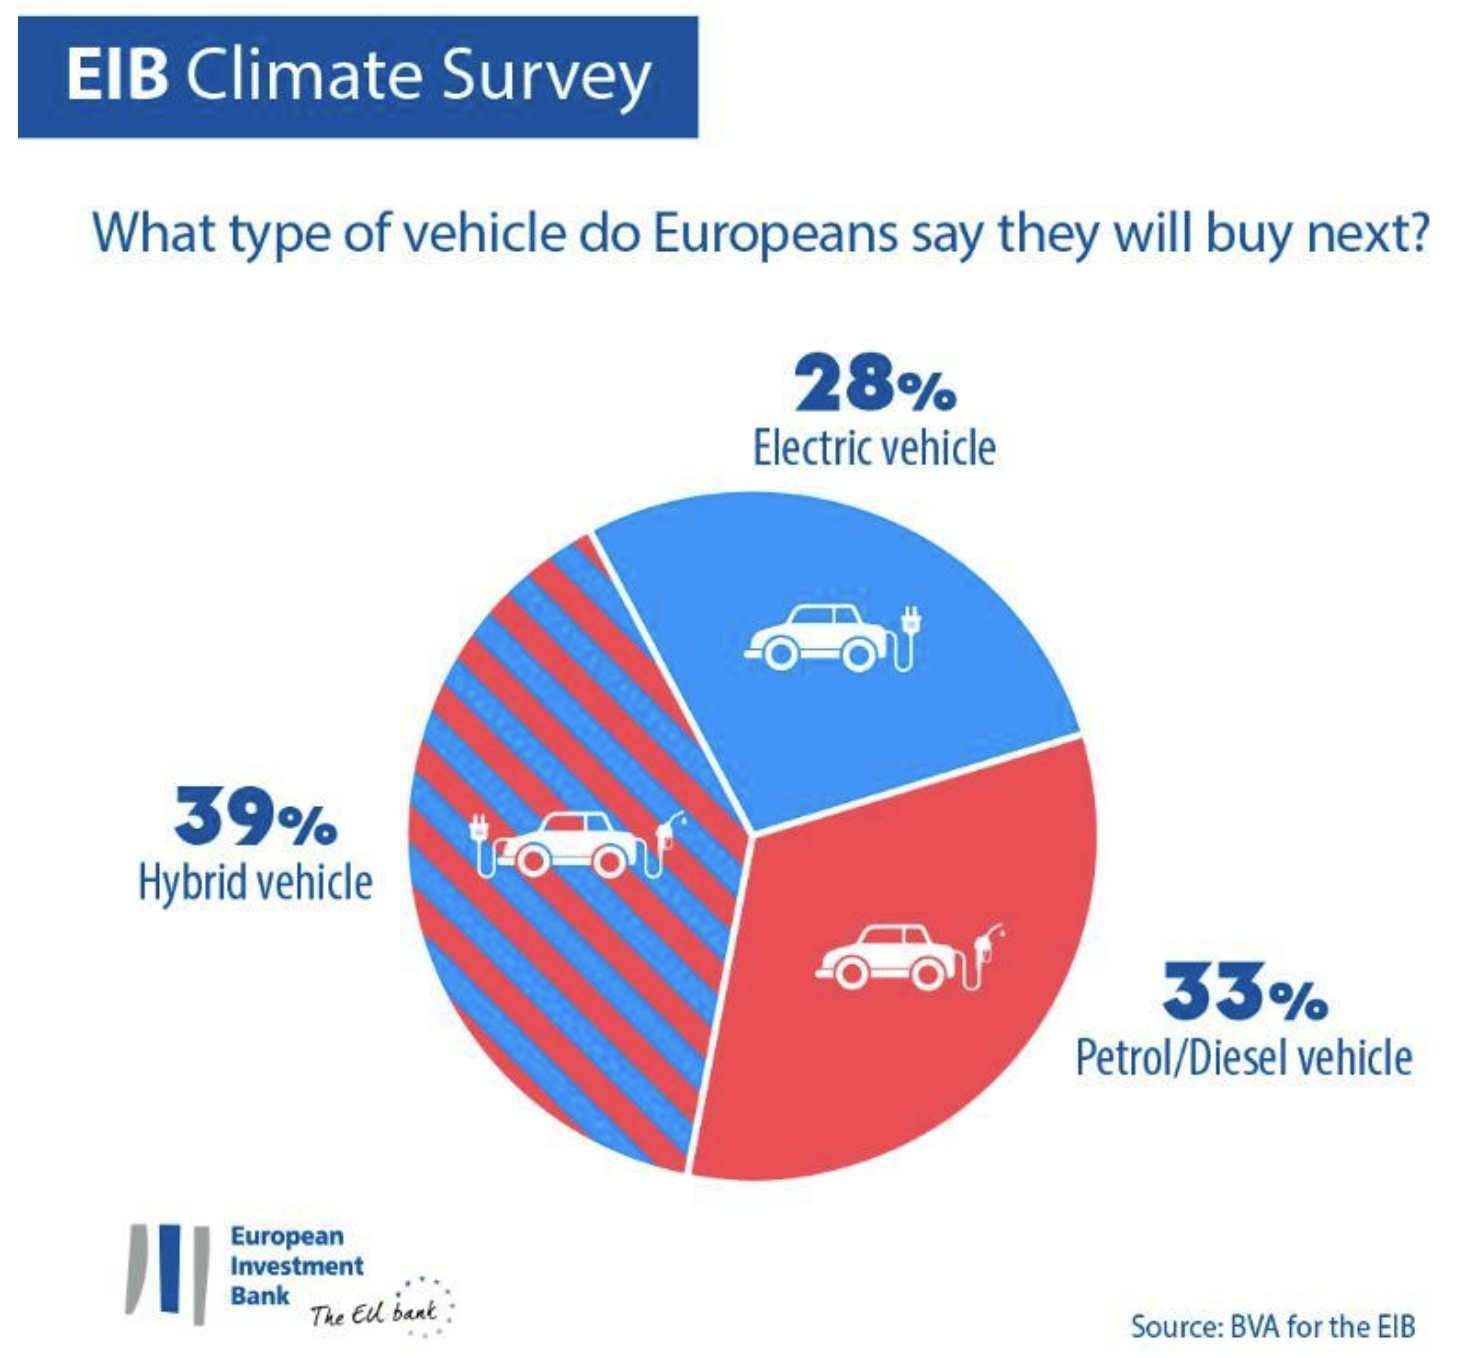 Pie chart showing what type of car Europeans will buy next